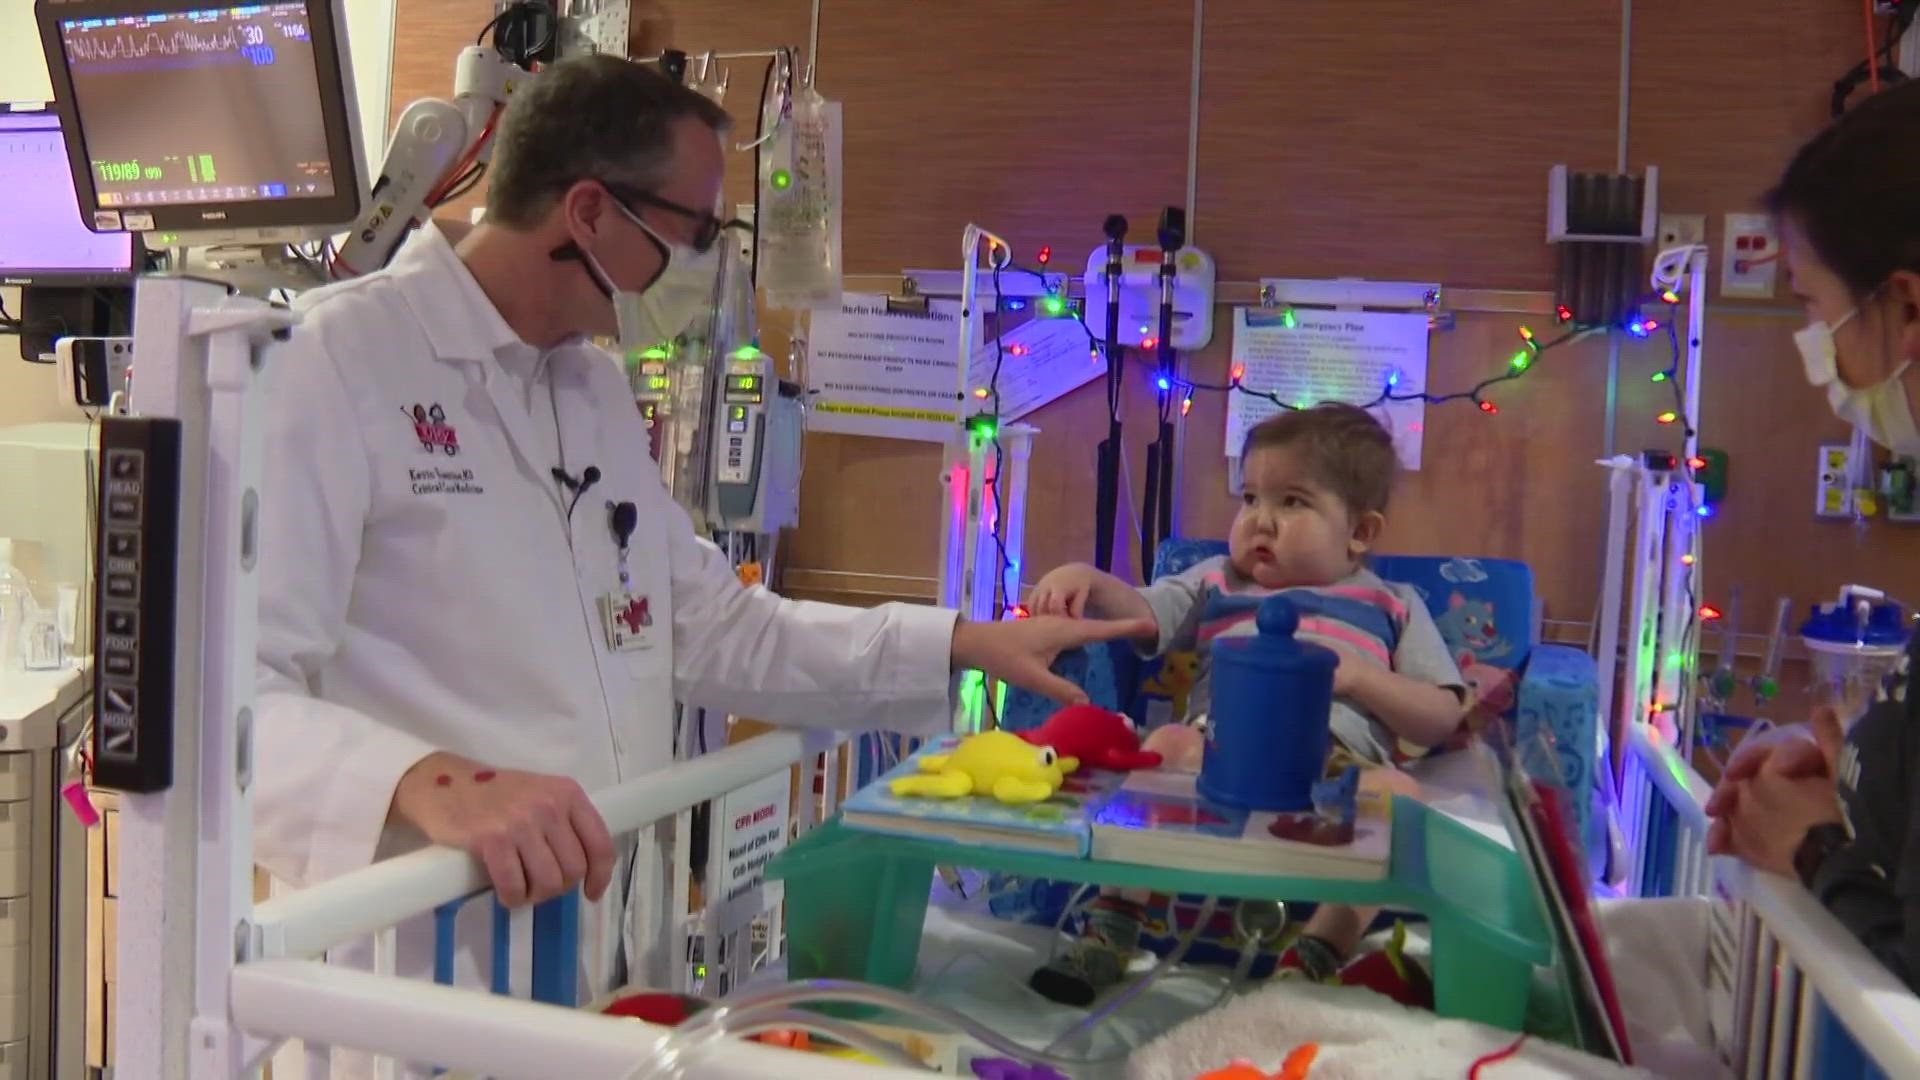 Every Valentine's Day, this doctor at Riley Children's Hospital is a favorite. And yes, Dr. Kevin Valentine is his real name!